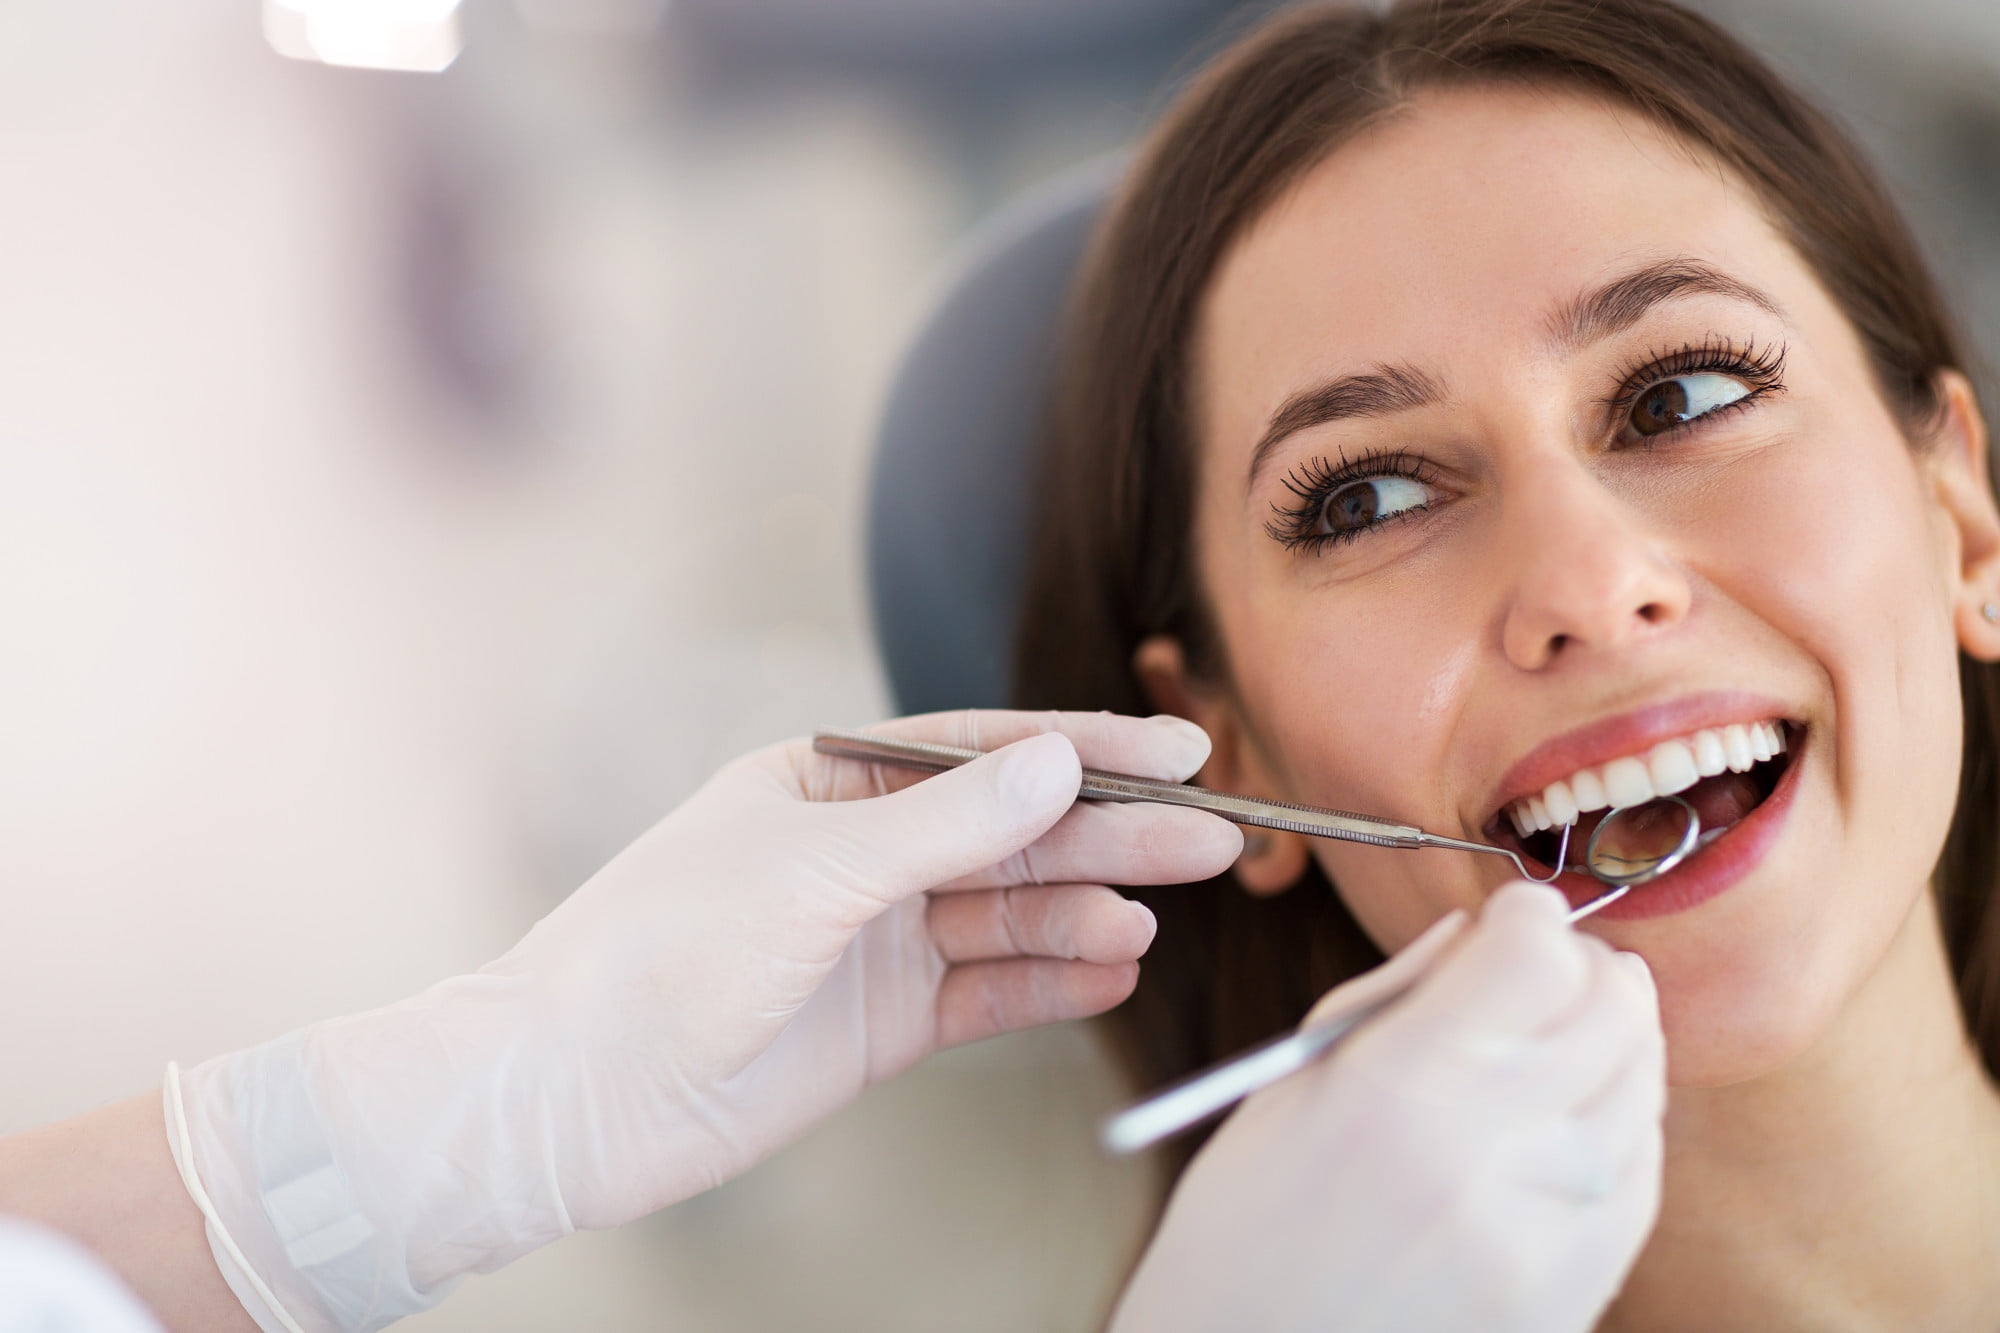 Are you wondering if holistic dentistry is right for your family? Click here for seven awesome benefits of holistic dentistry that you'll love.